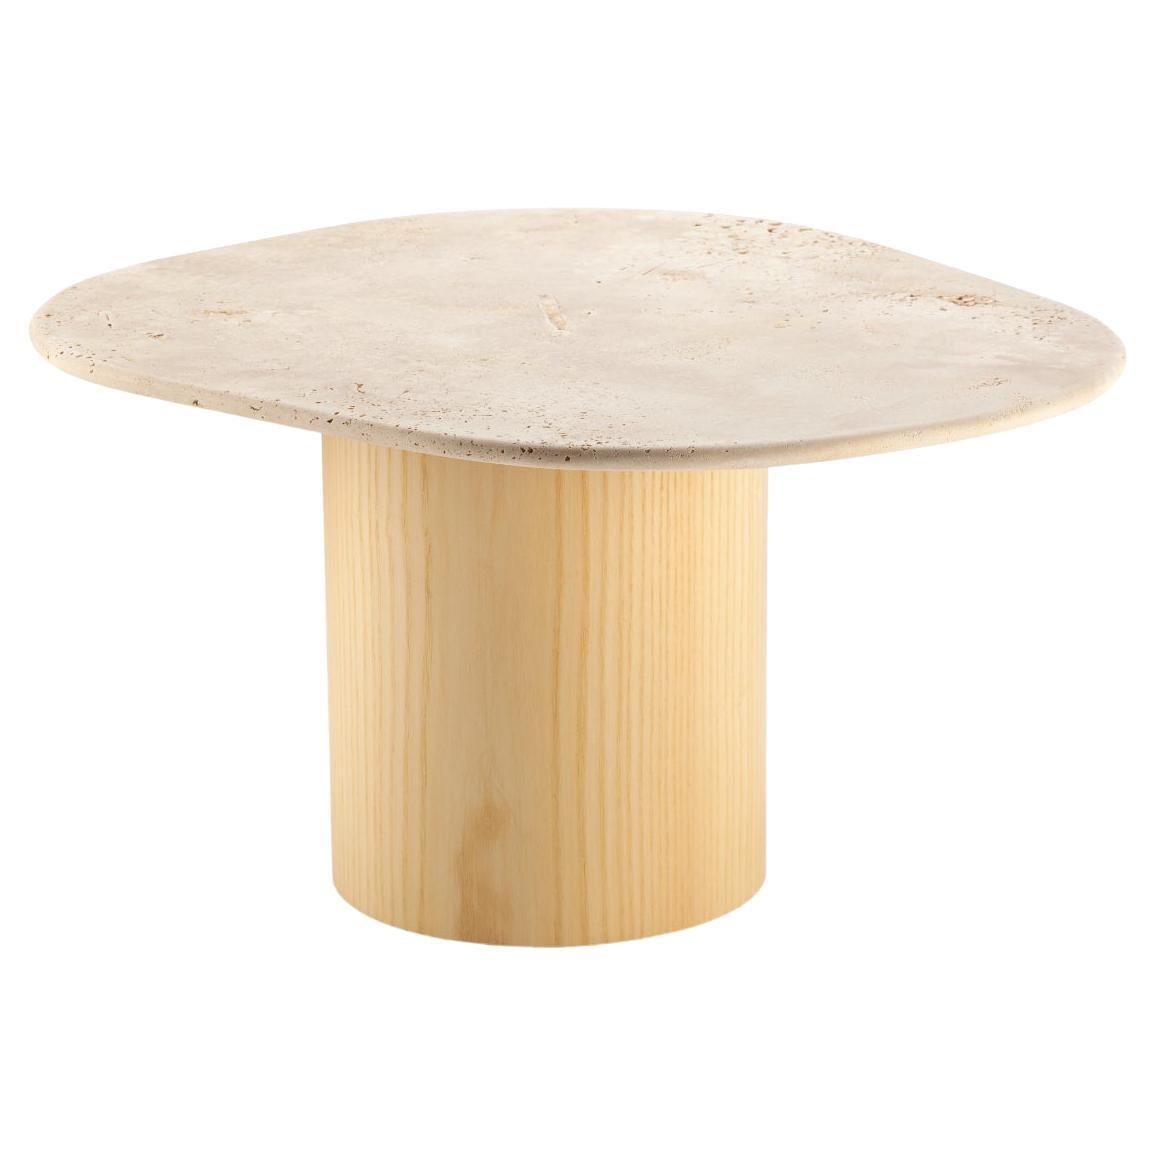 L’anamour Side Table by Dooq